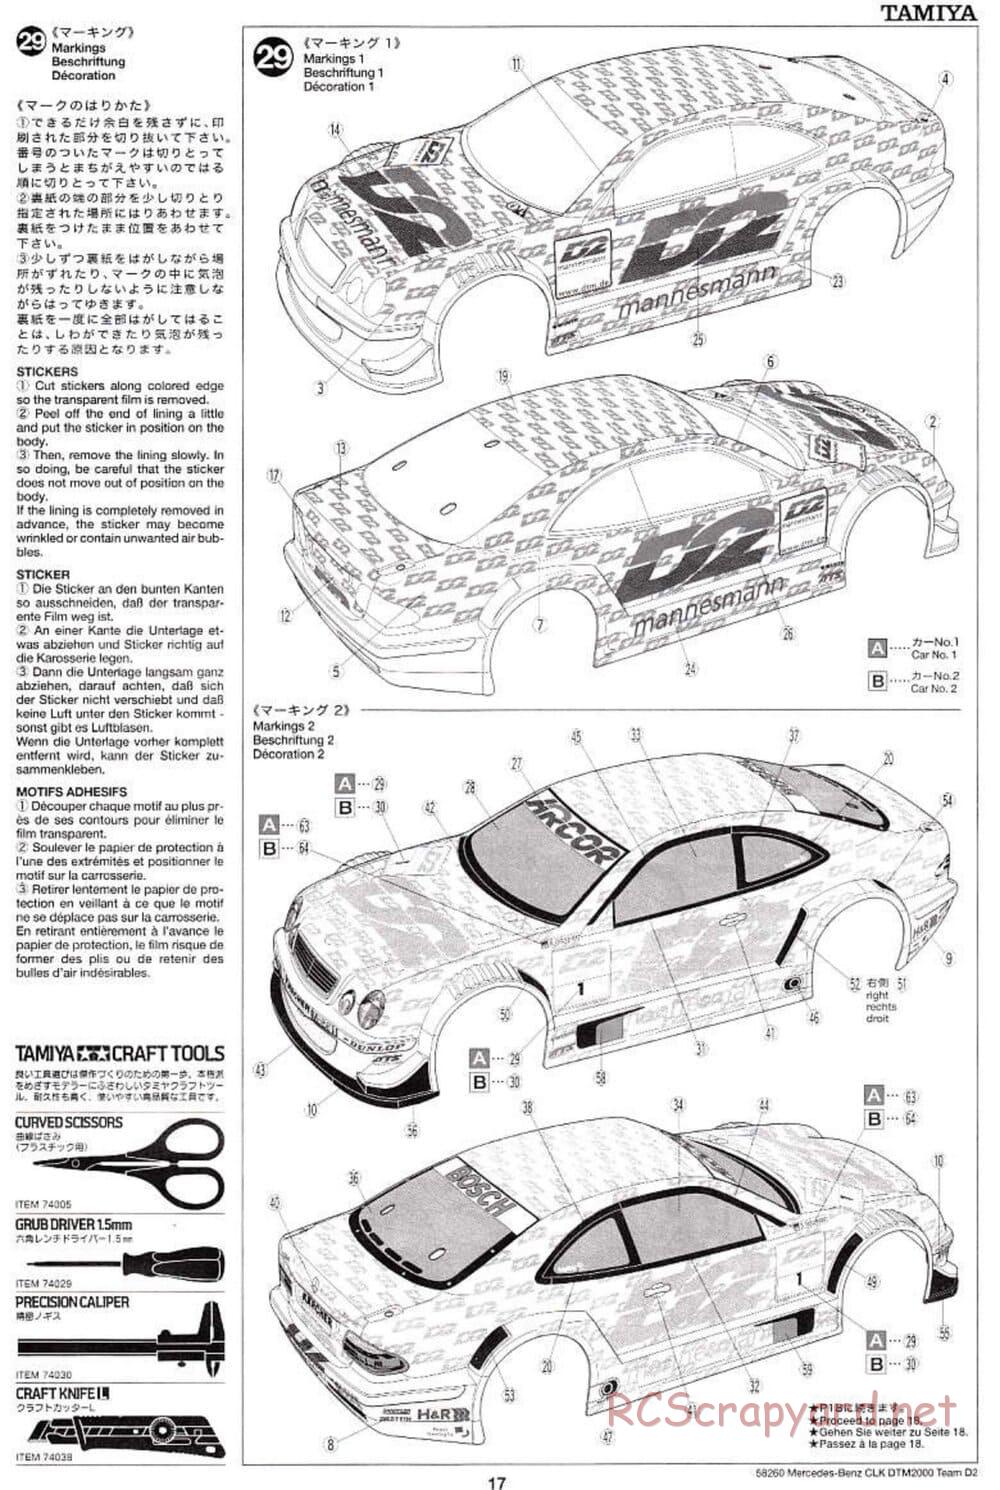 Tamiya - Mercedes Benz CLK DTM 2000 Team D2 - TL-01 Chassis - Manual - Page 17